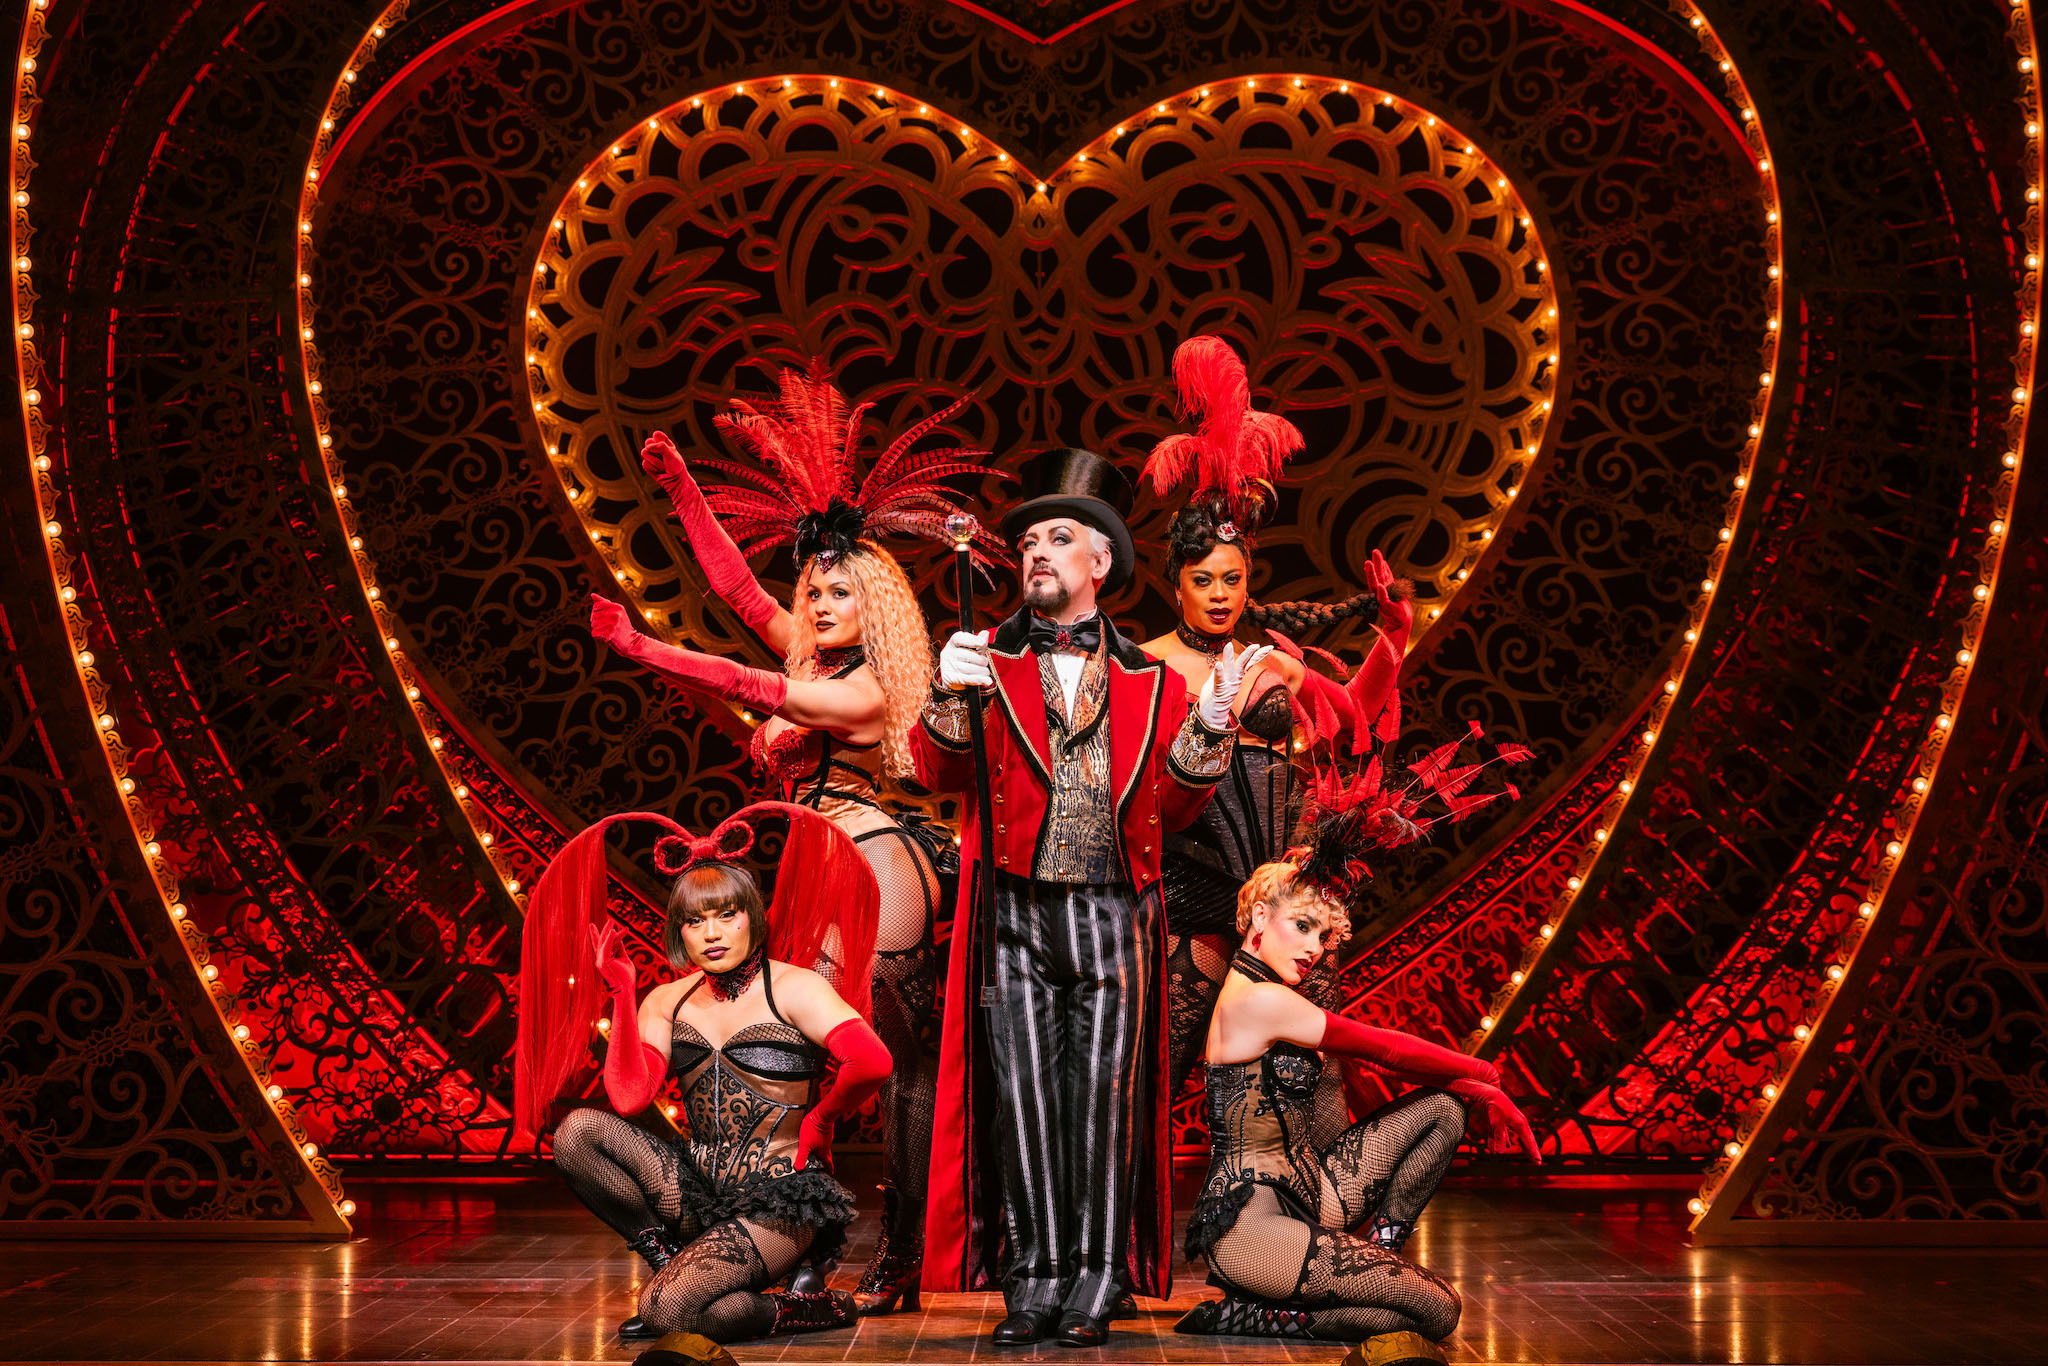 The cast on stage during Moulin Rouge.